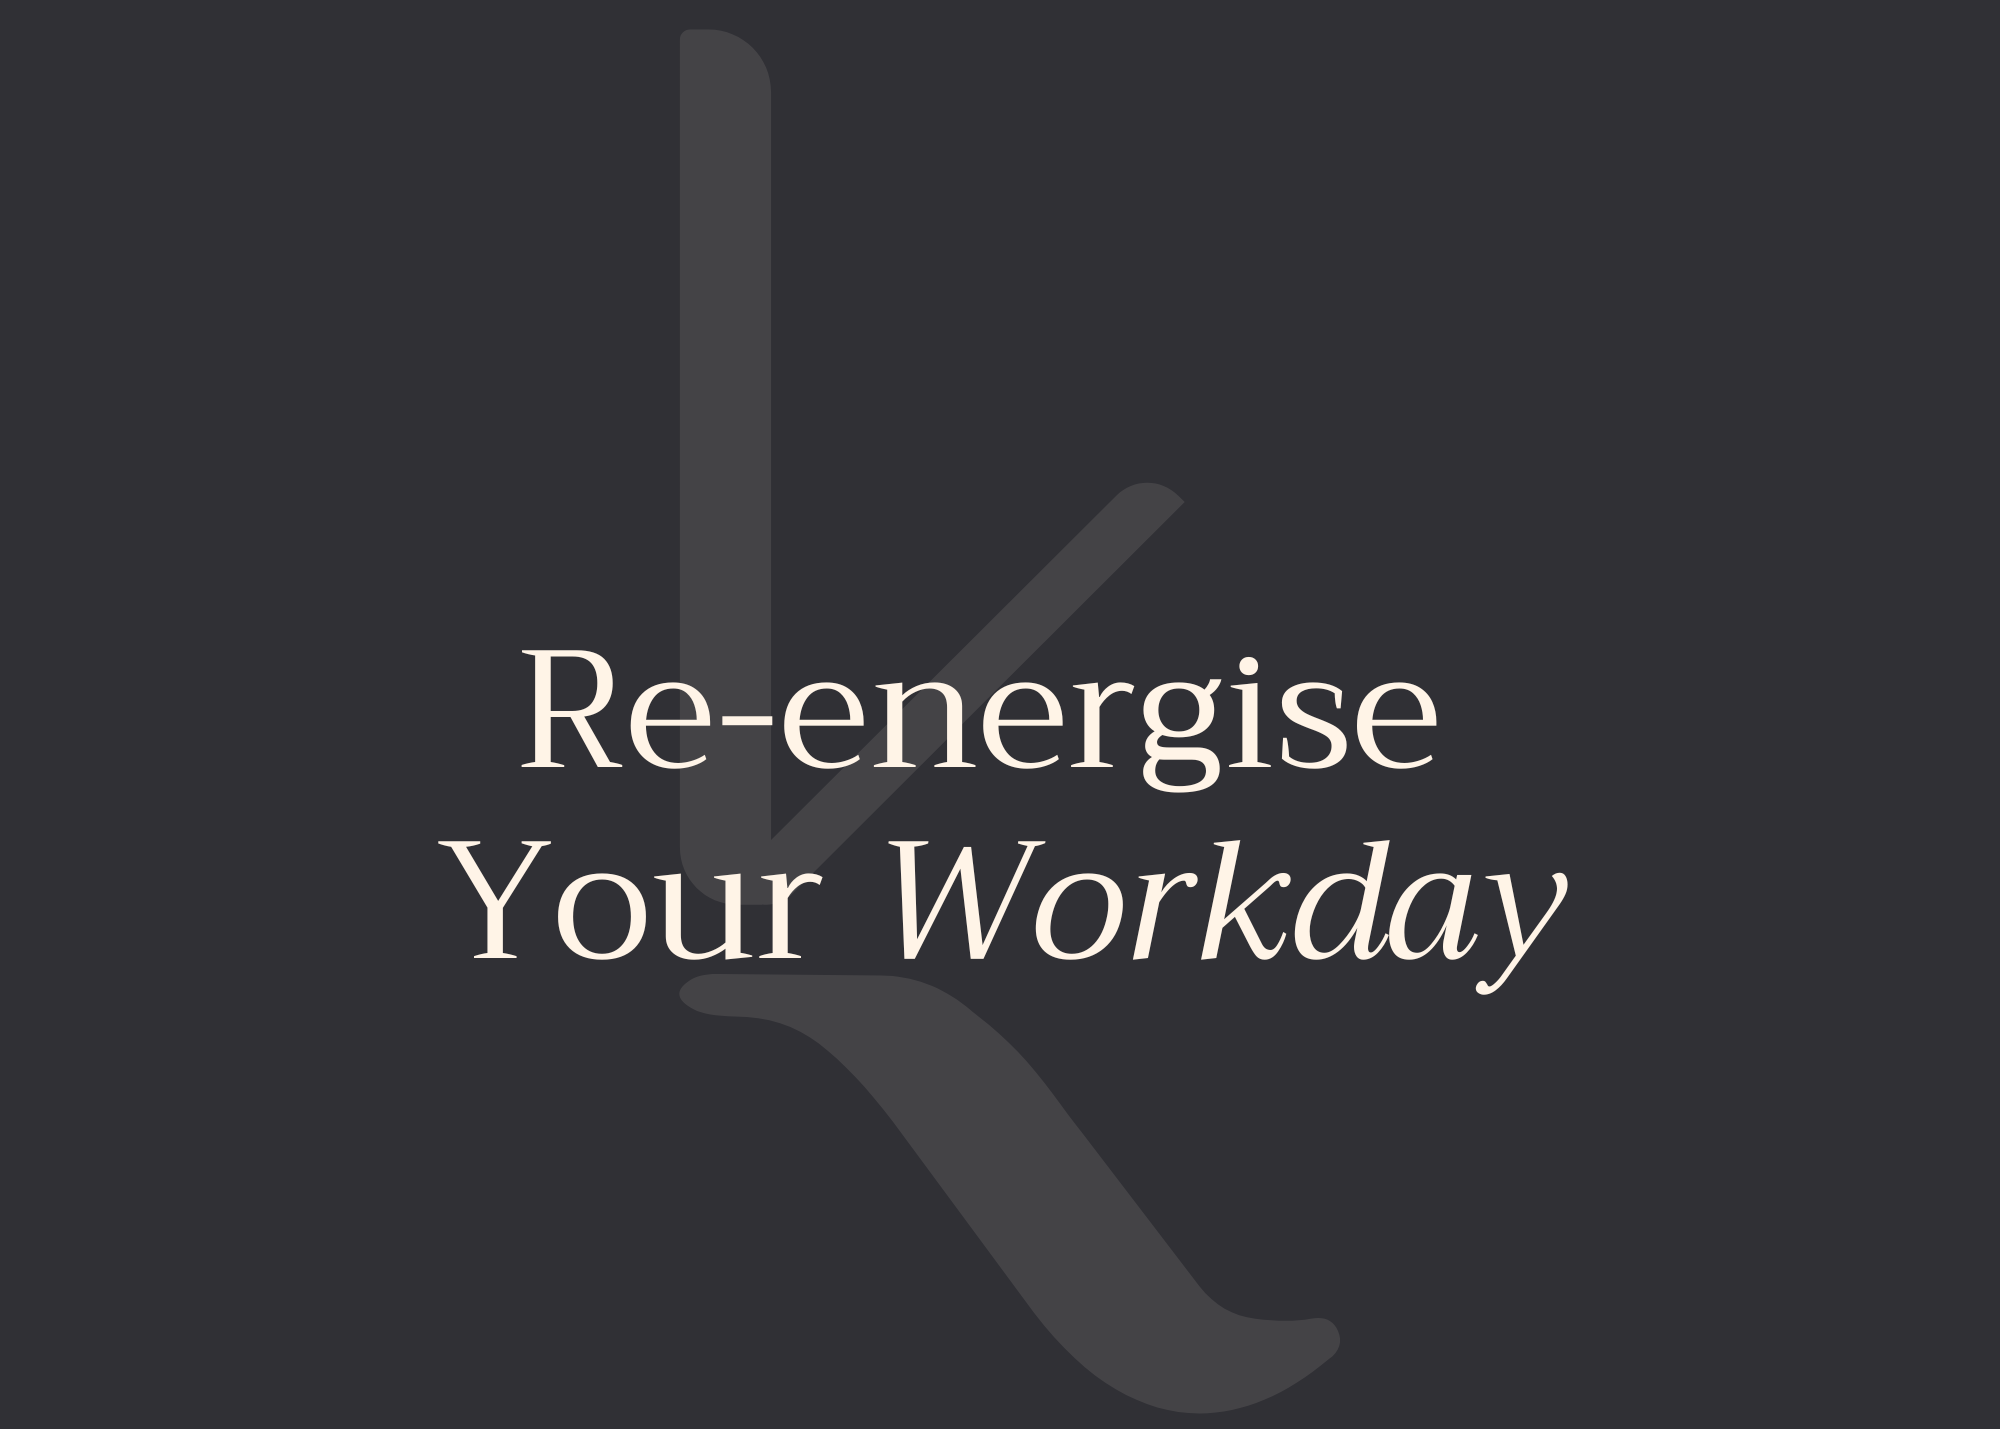 Re-energize your workday